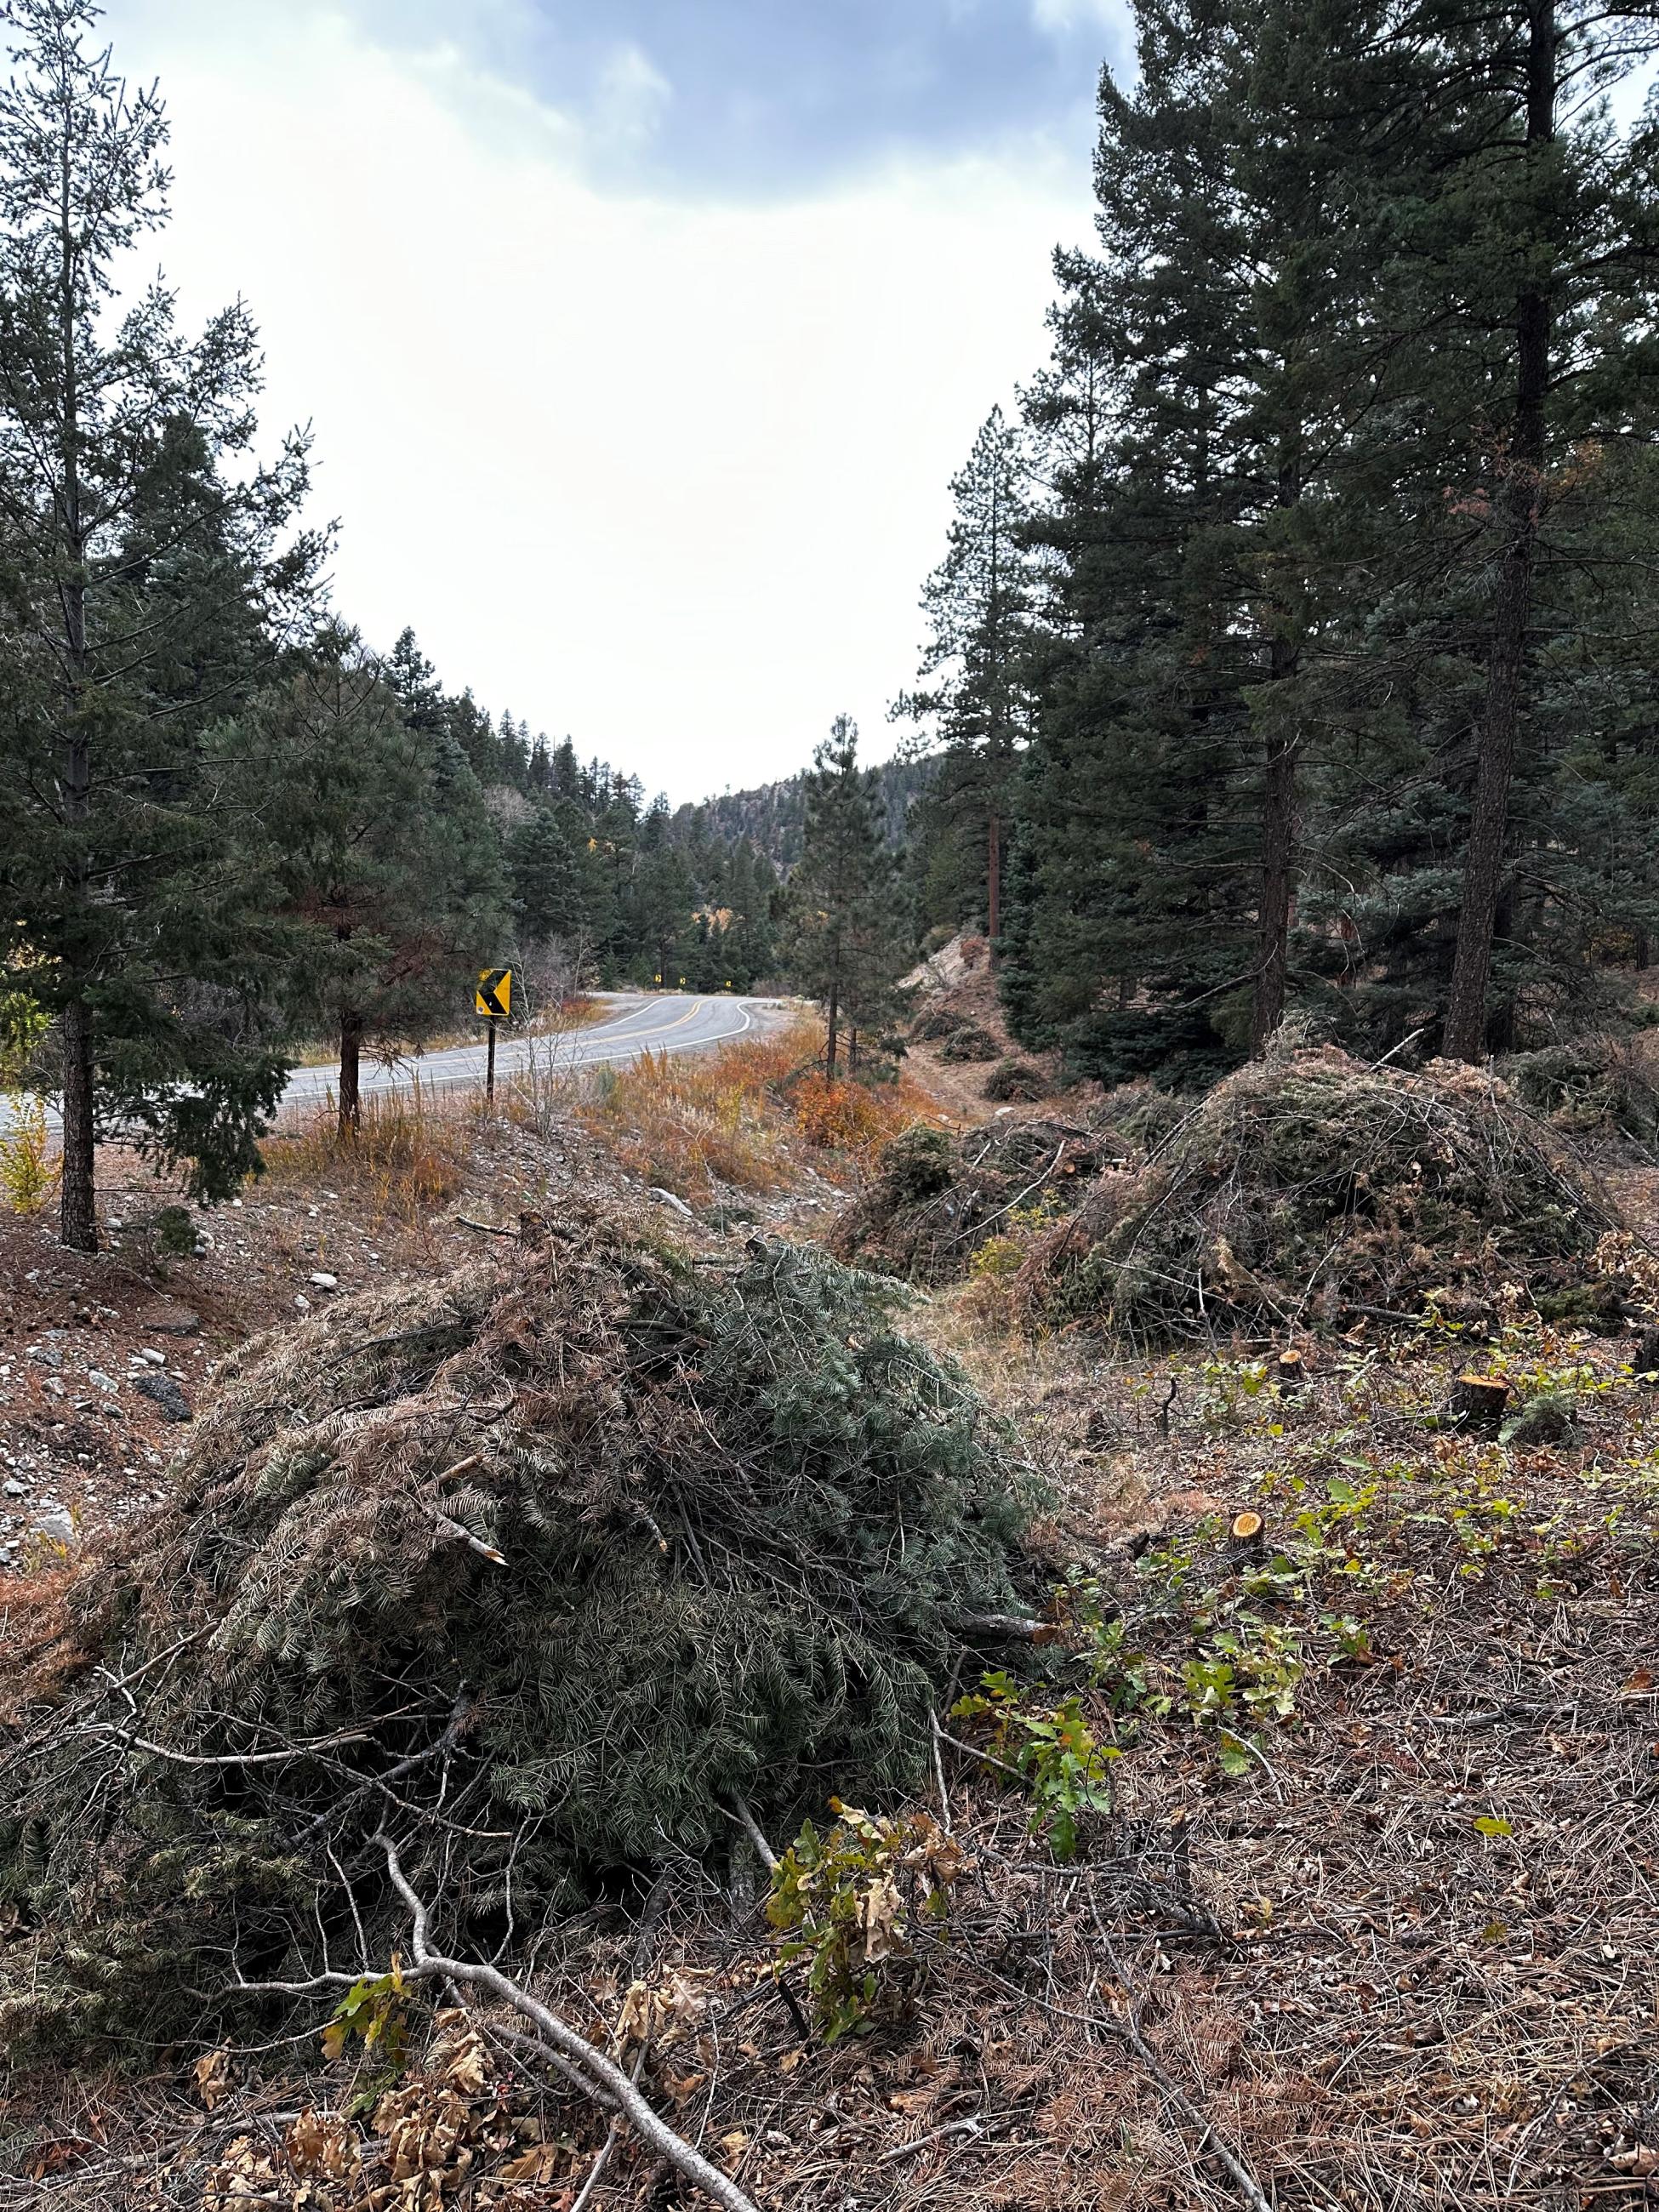 A few piles of woody debris are piled in a pine forest along a roadway.